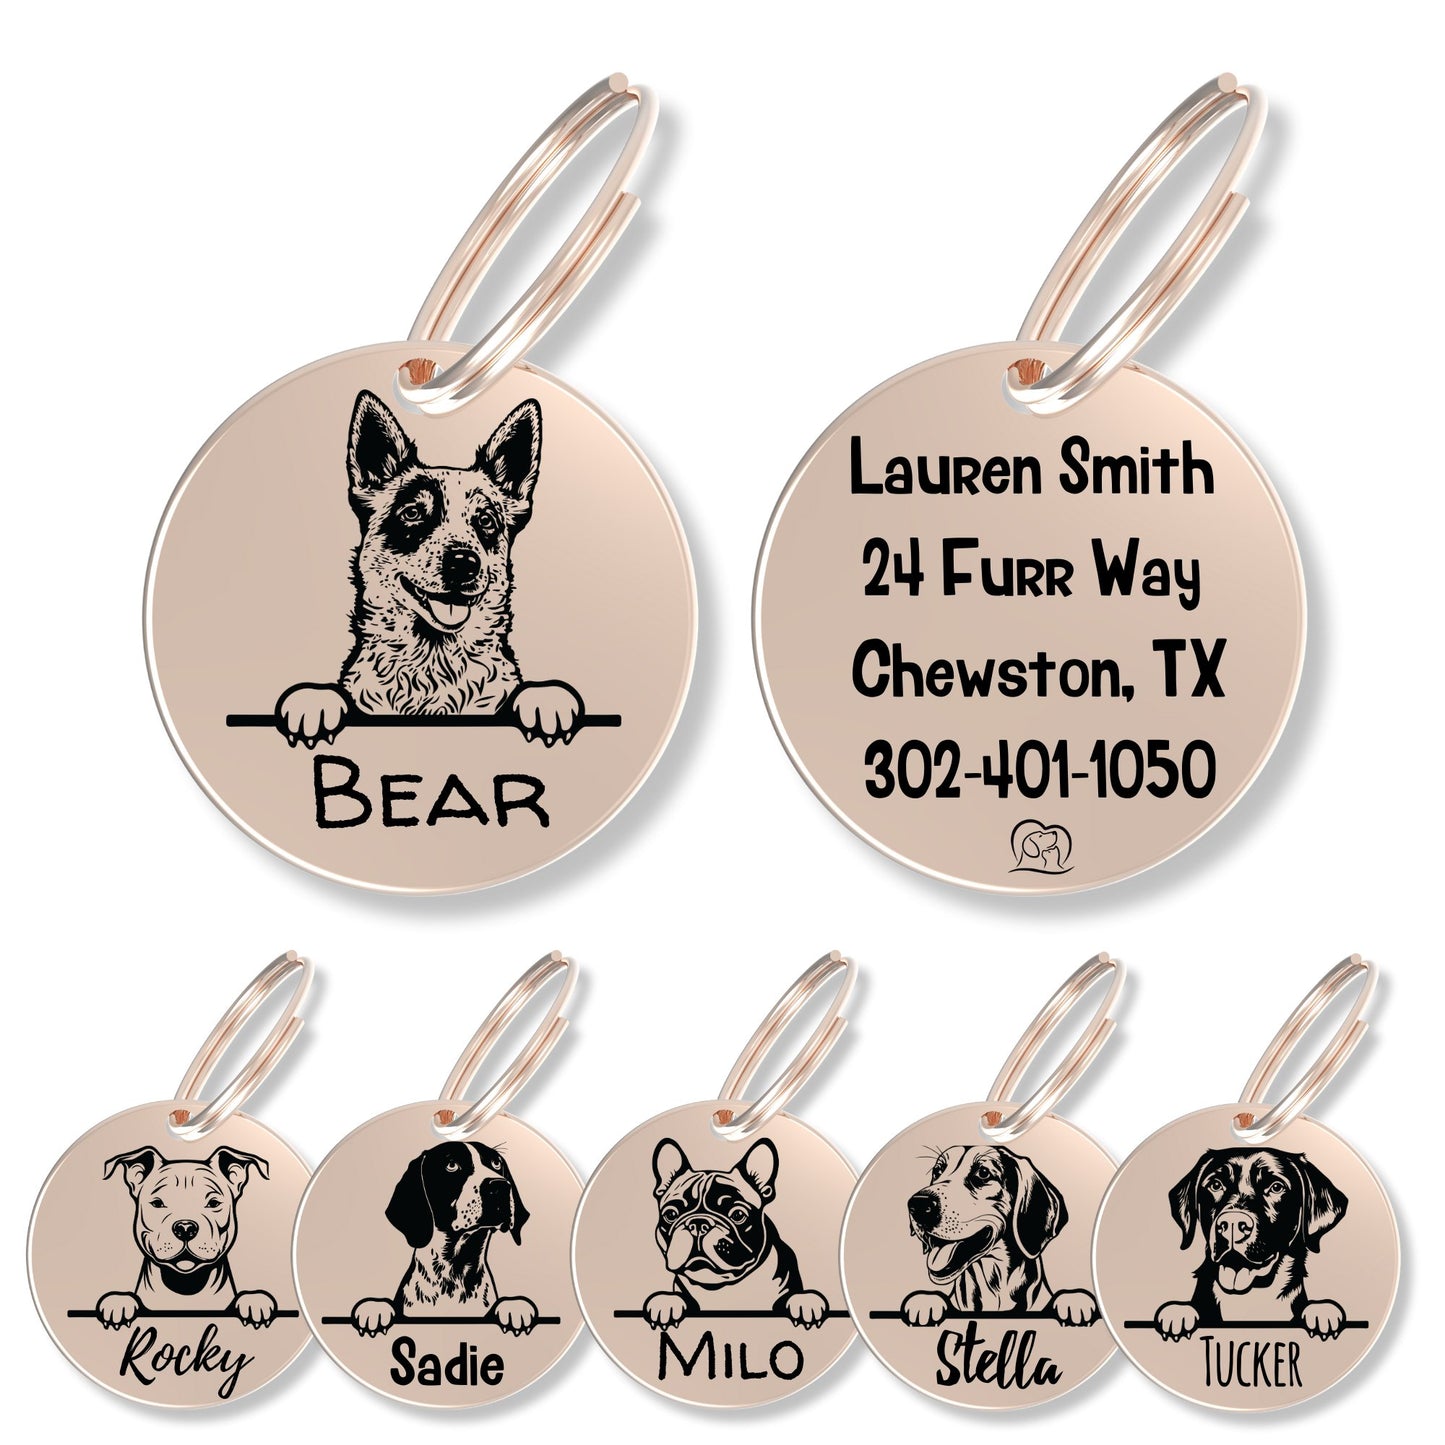 Breed Dog Tag - Personalized Breed Dog Tag (Red Heeler)